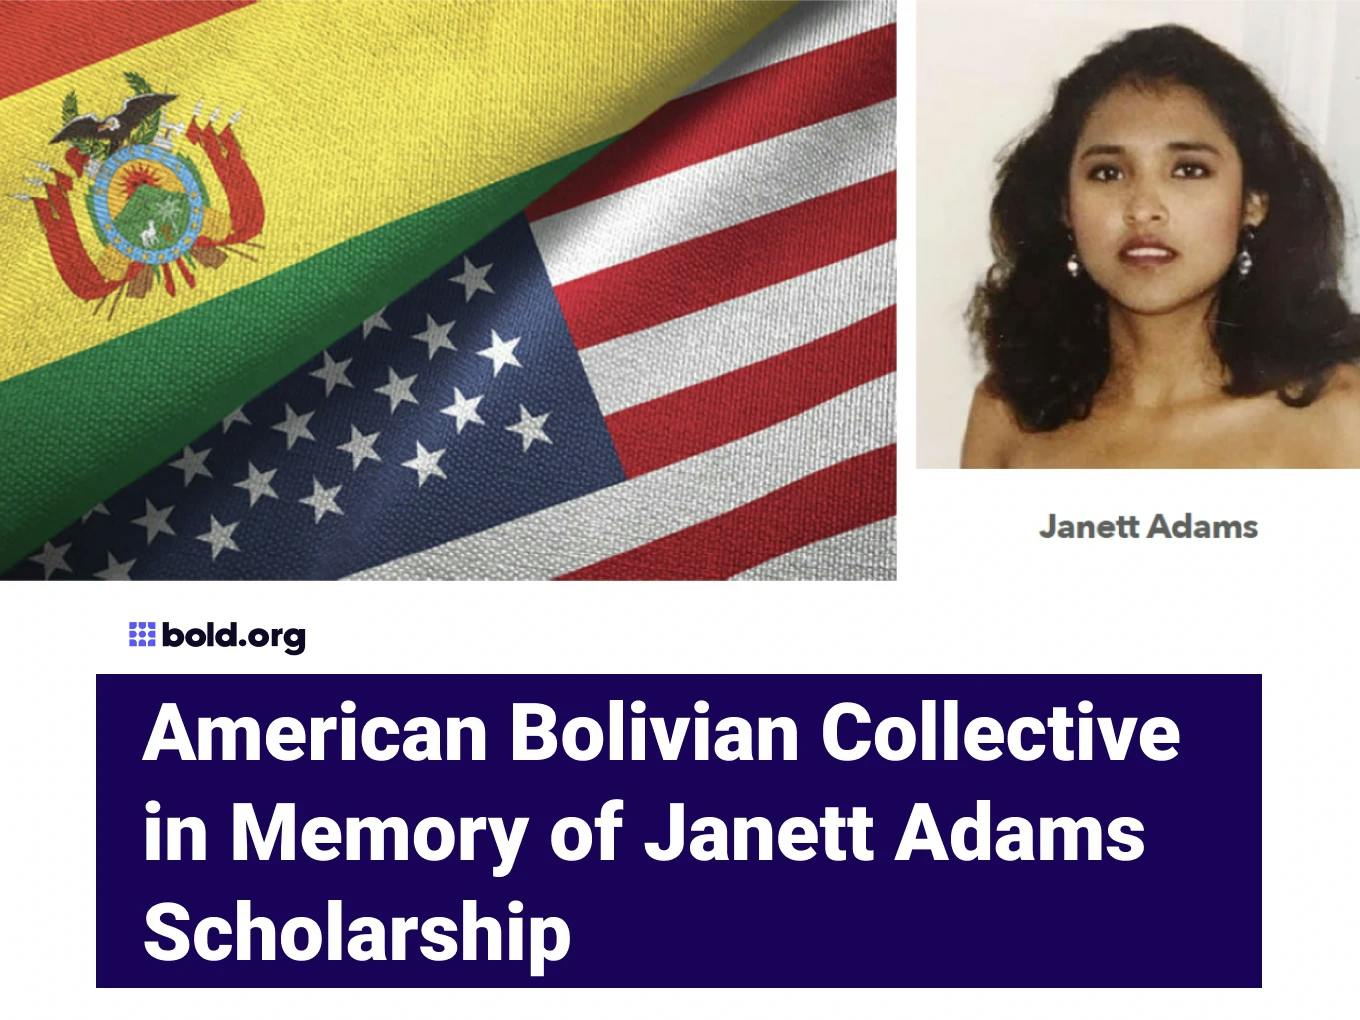 American Bolivian Collective in Memory of Janett Adams Scholarship